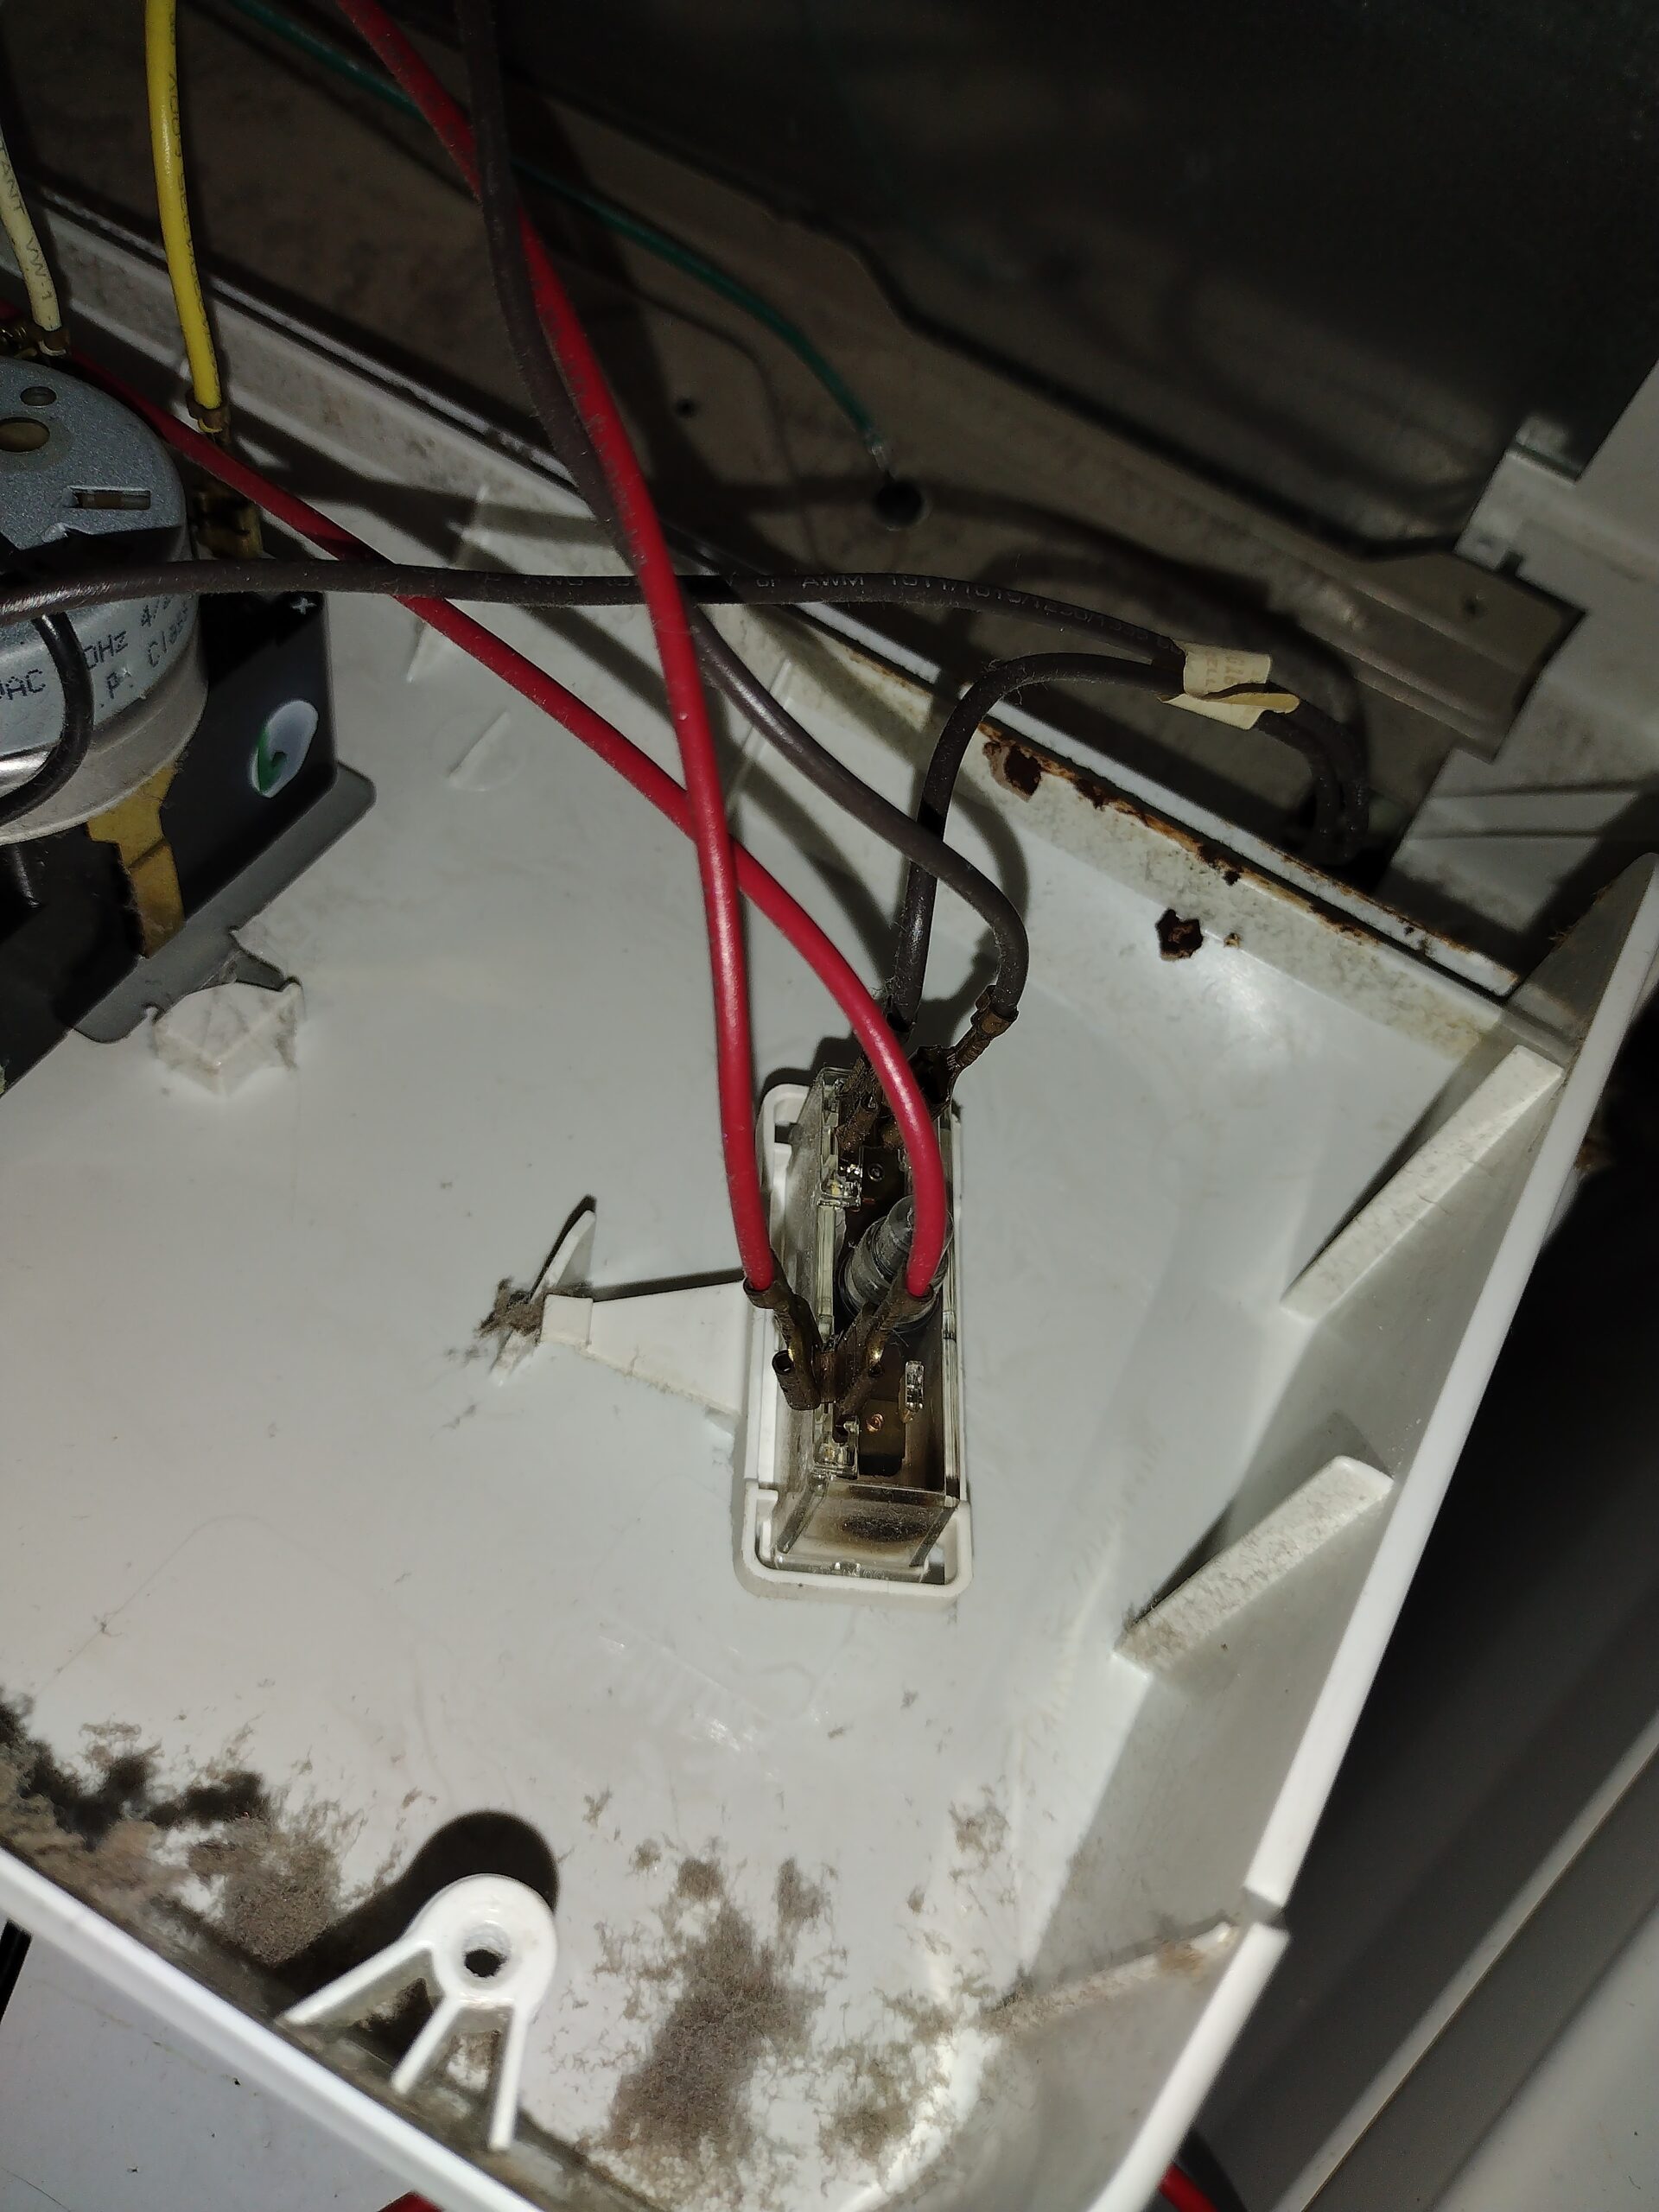 appliance repair dryer repair repaired existing start switch check trotting simpson st bellview fl 32526